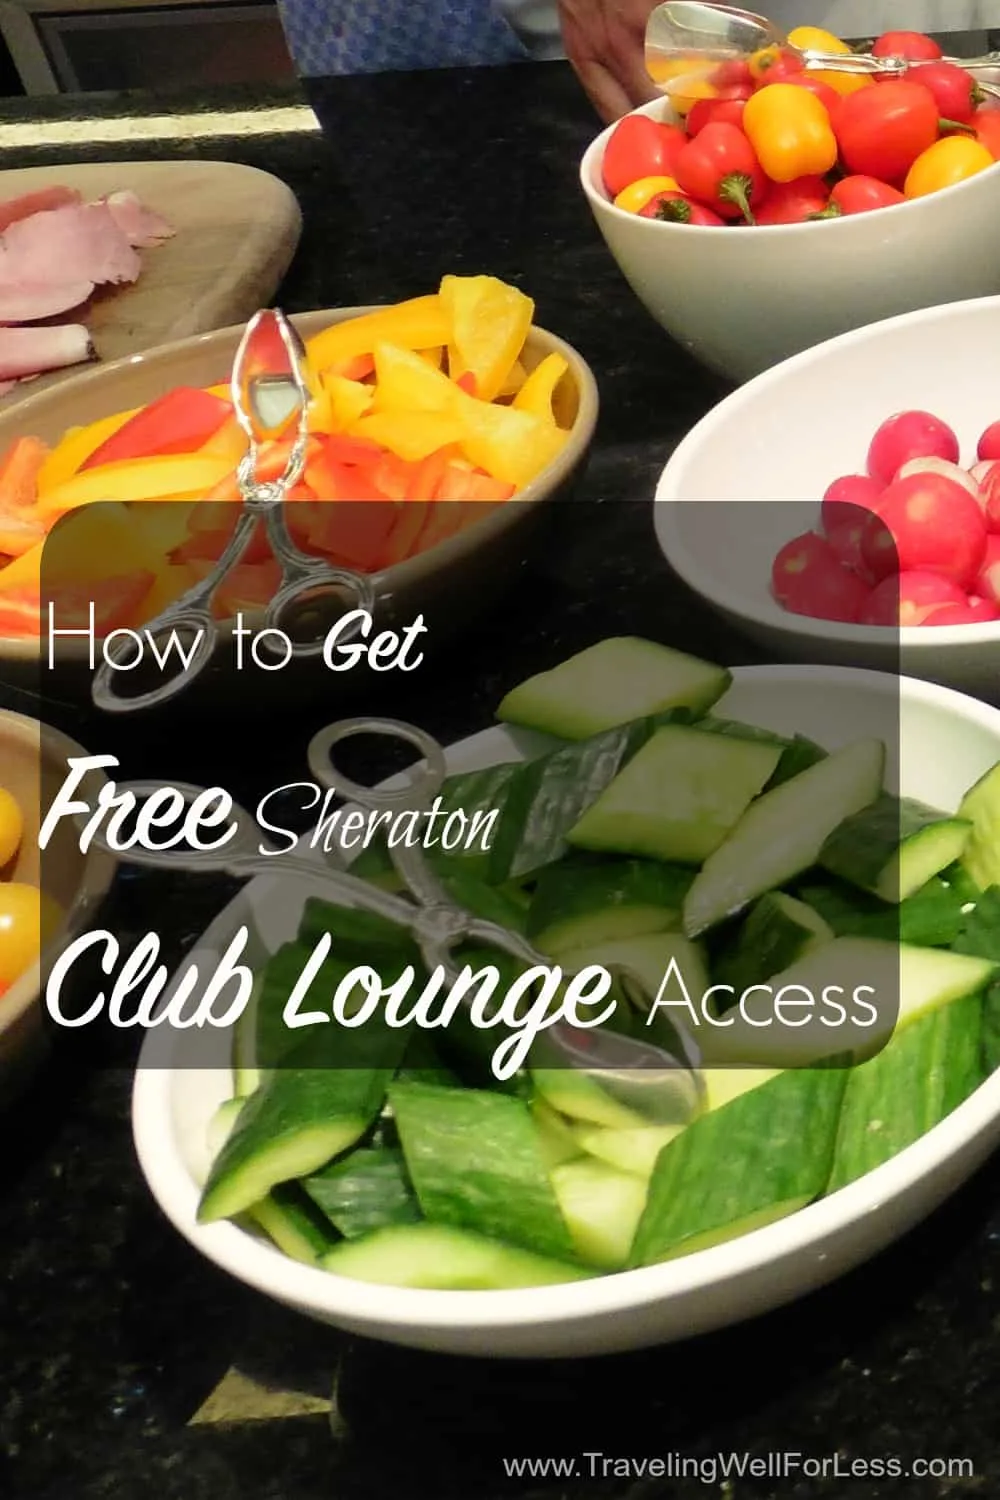 How to Get Free Sheraton Club Lounge Access